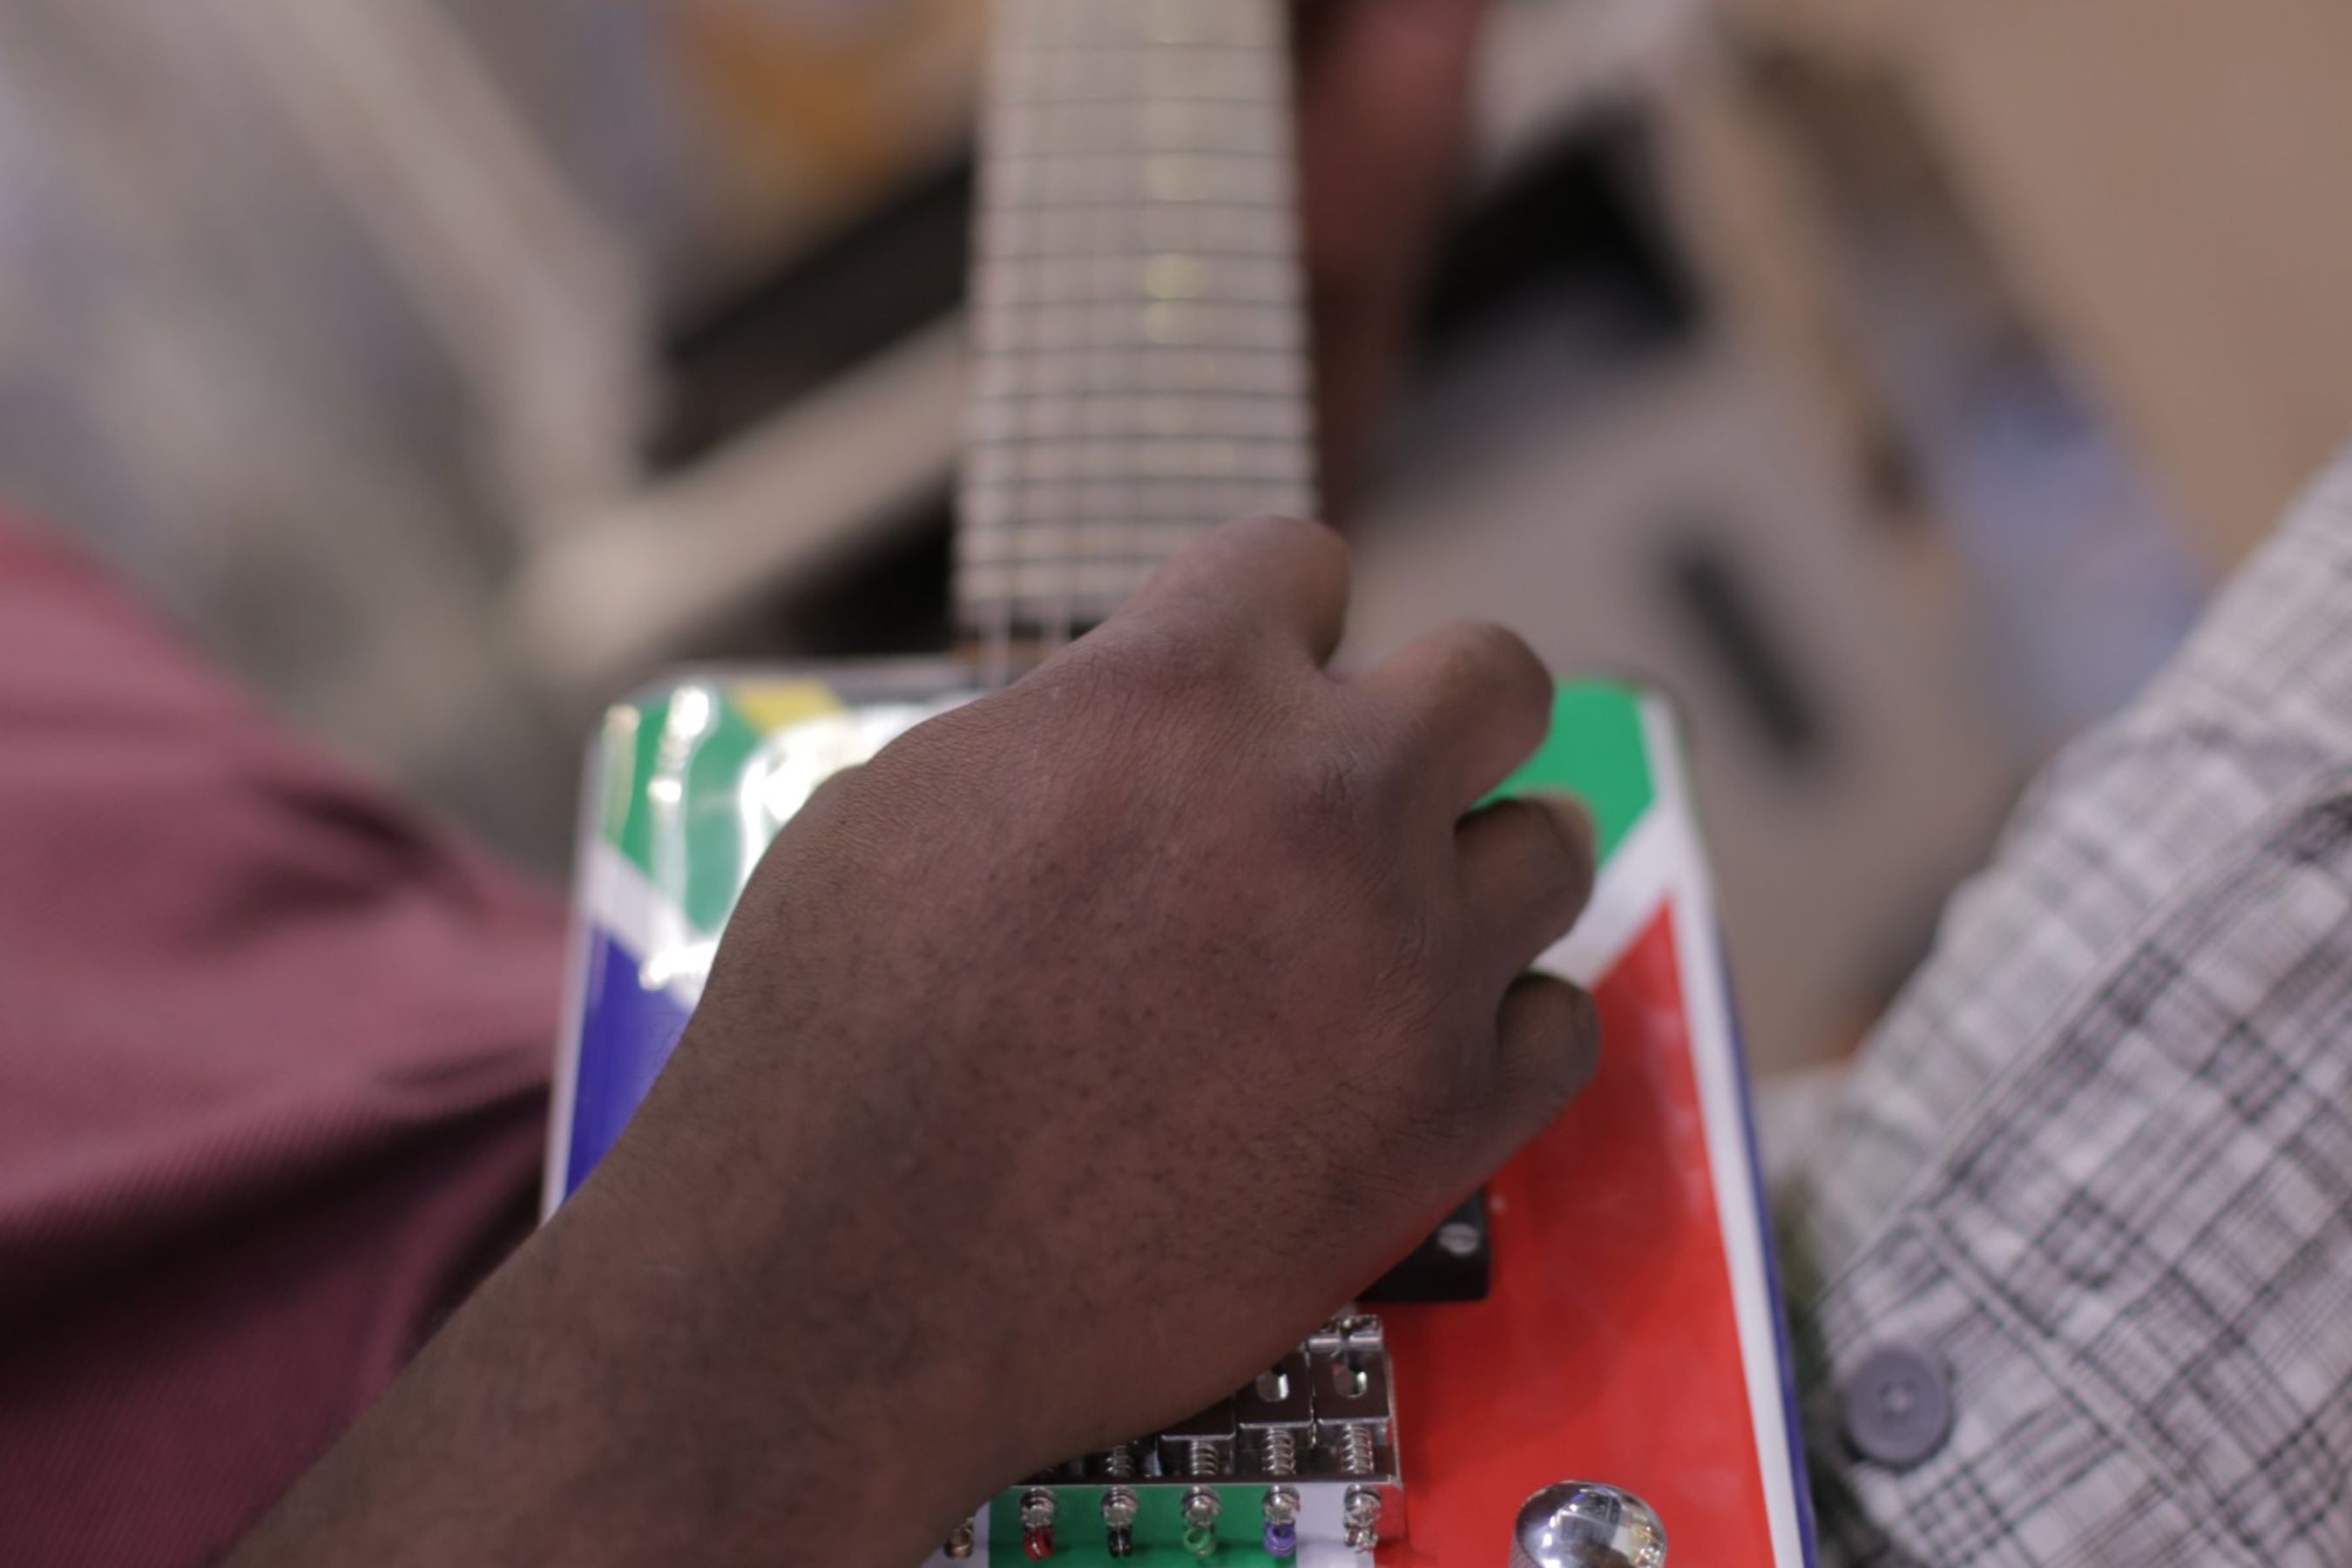 $600 guitars made from oil cans: The authentic South Afri-can